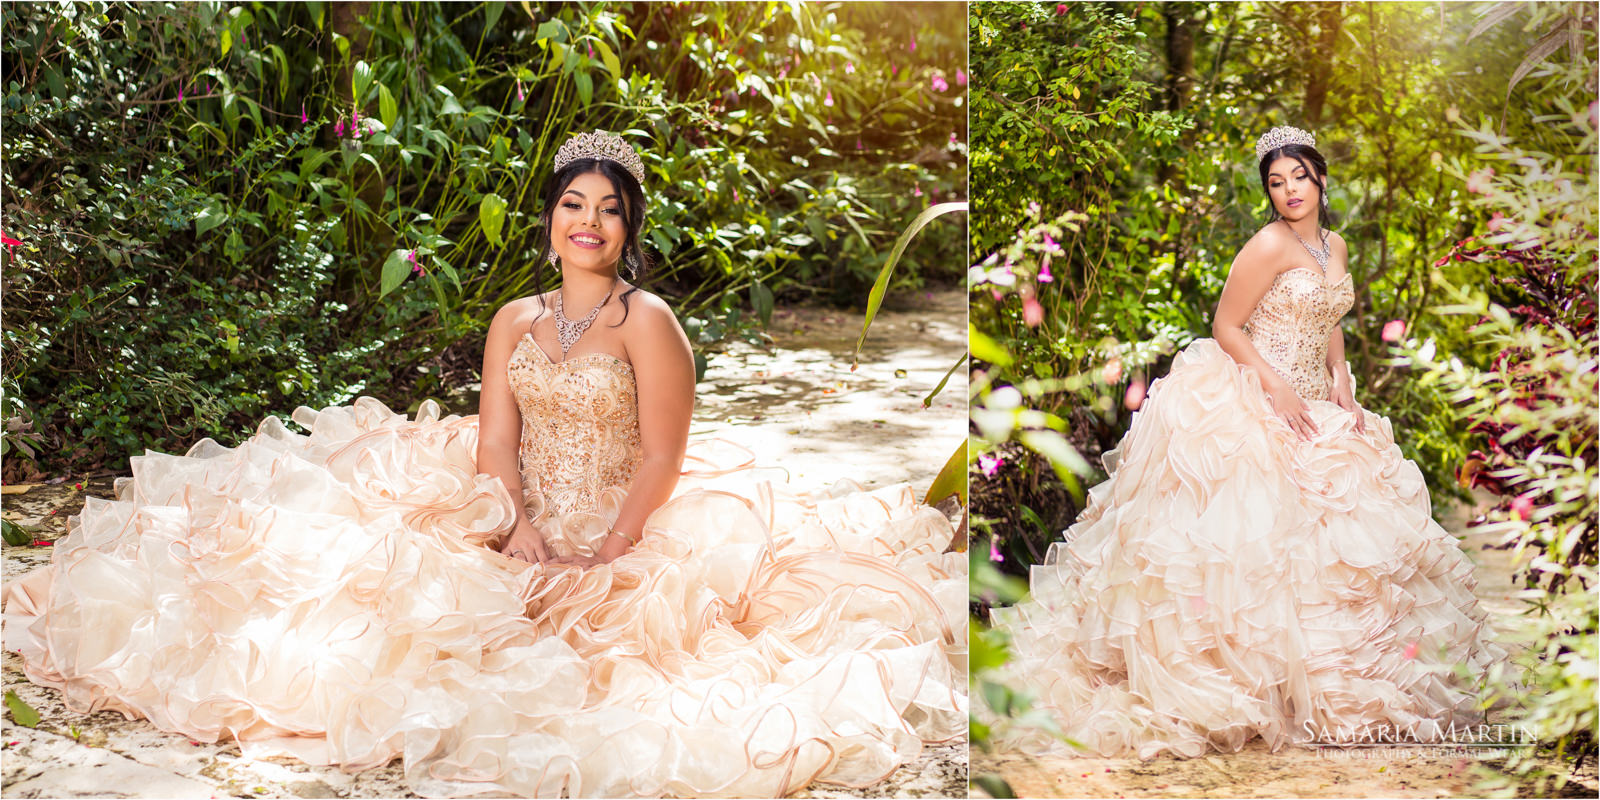 QUINCEANERA PHOTOGRAPHY AND DRESSES BY SAMARIA MARTIN | QUINCEANERA DRESSES IN MIAMI| QUINCEANERA PHOTOGRAPHERS IN MIAMI |BEST QUINCEANERA PHOGRAPHERS IN MIAMI | QUINCE